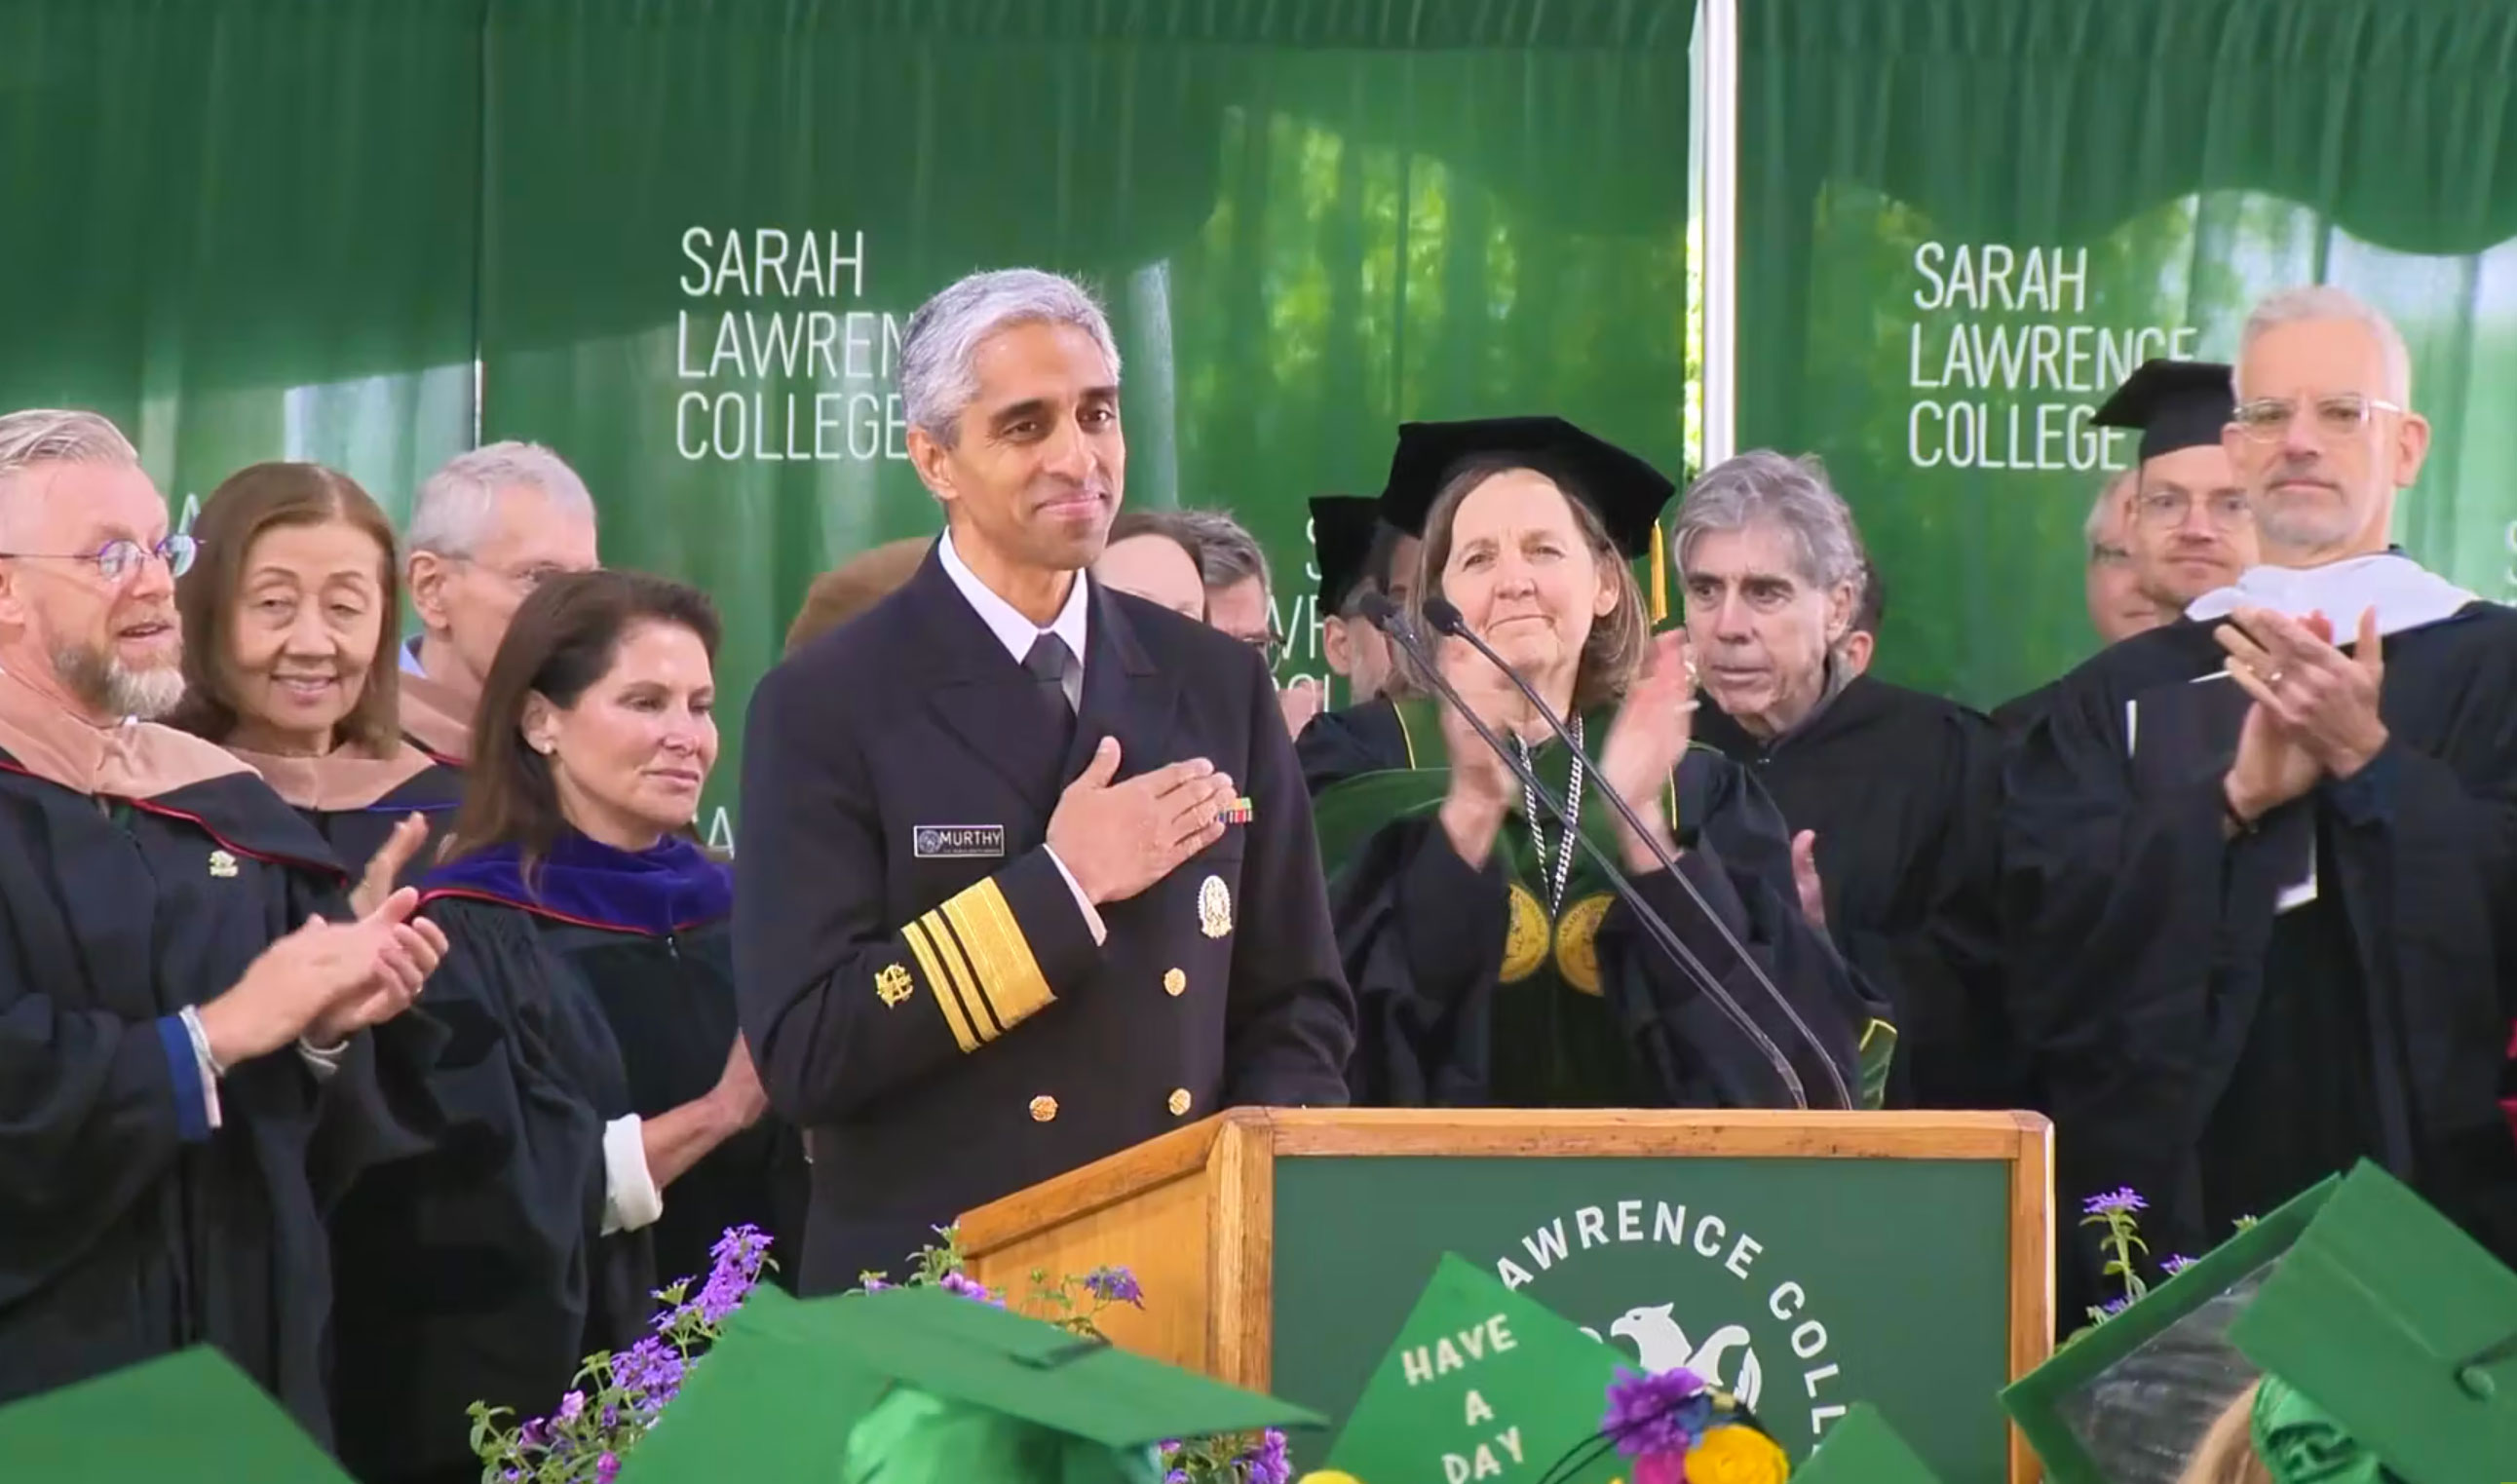 U.S. Surgeon General Vivek Murthy holds hand over heart while receiving a standing ovation